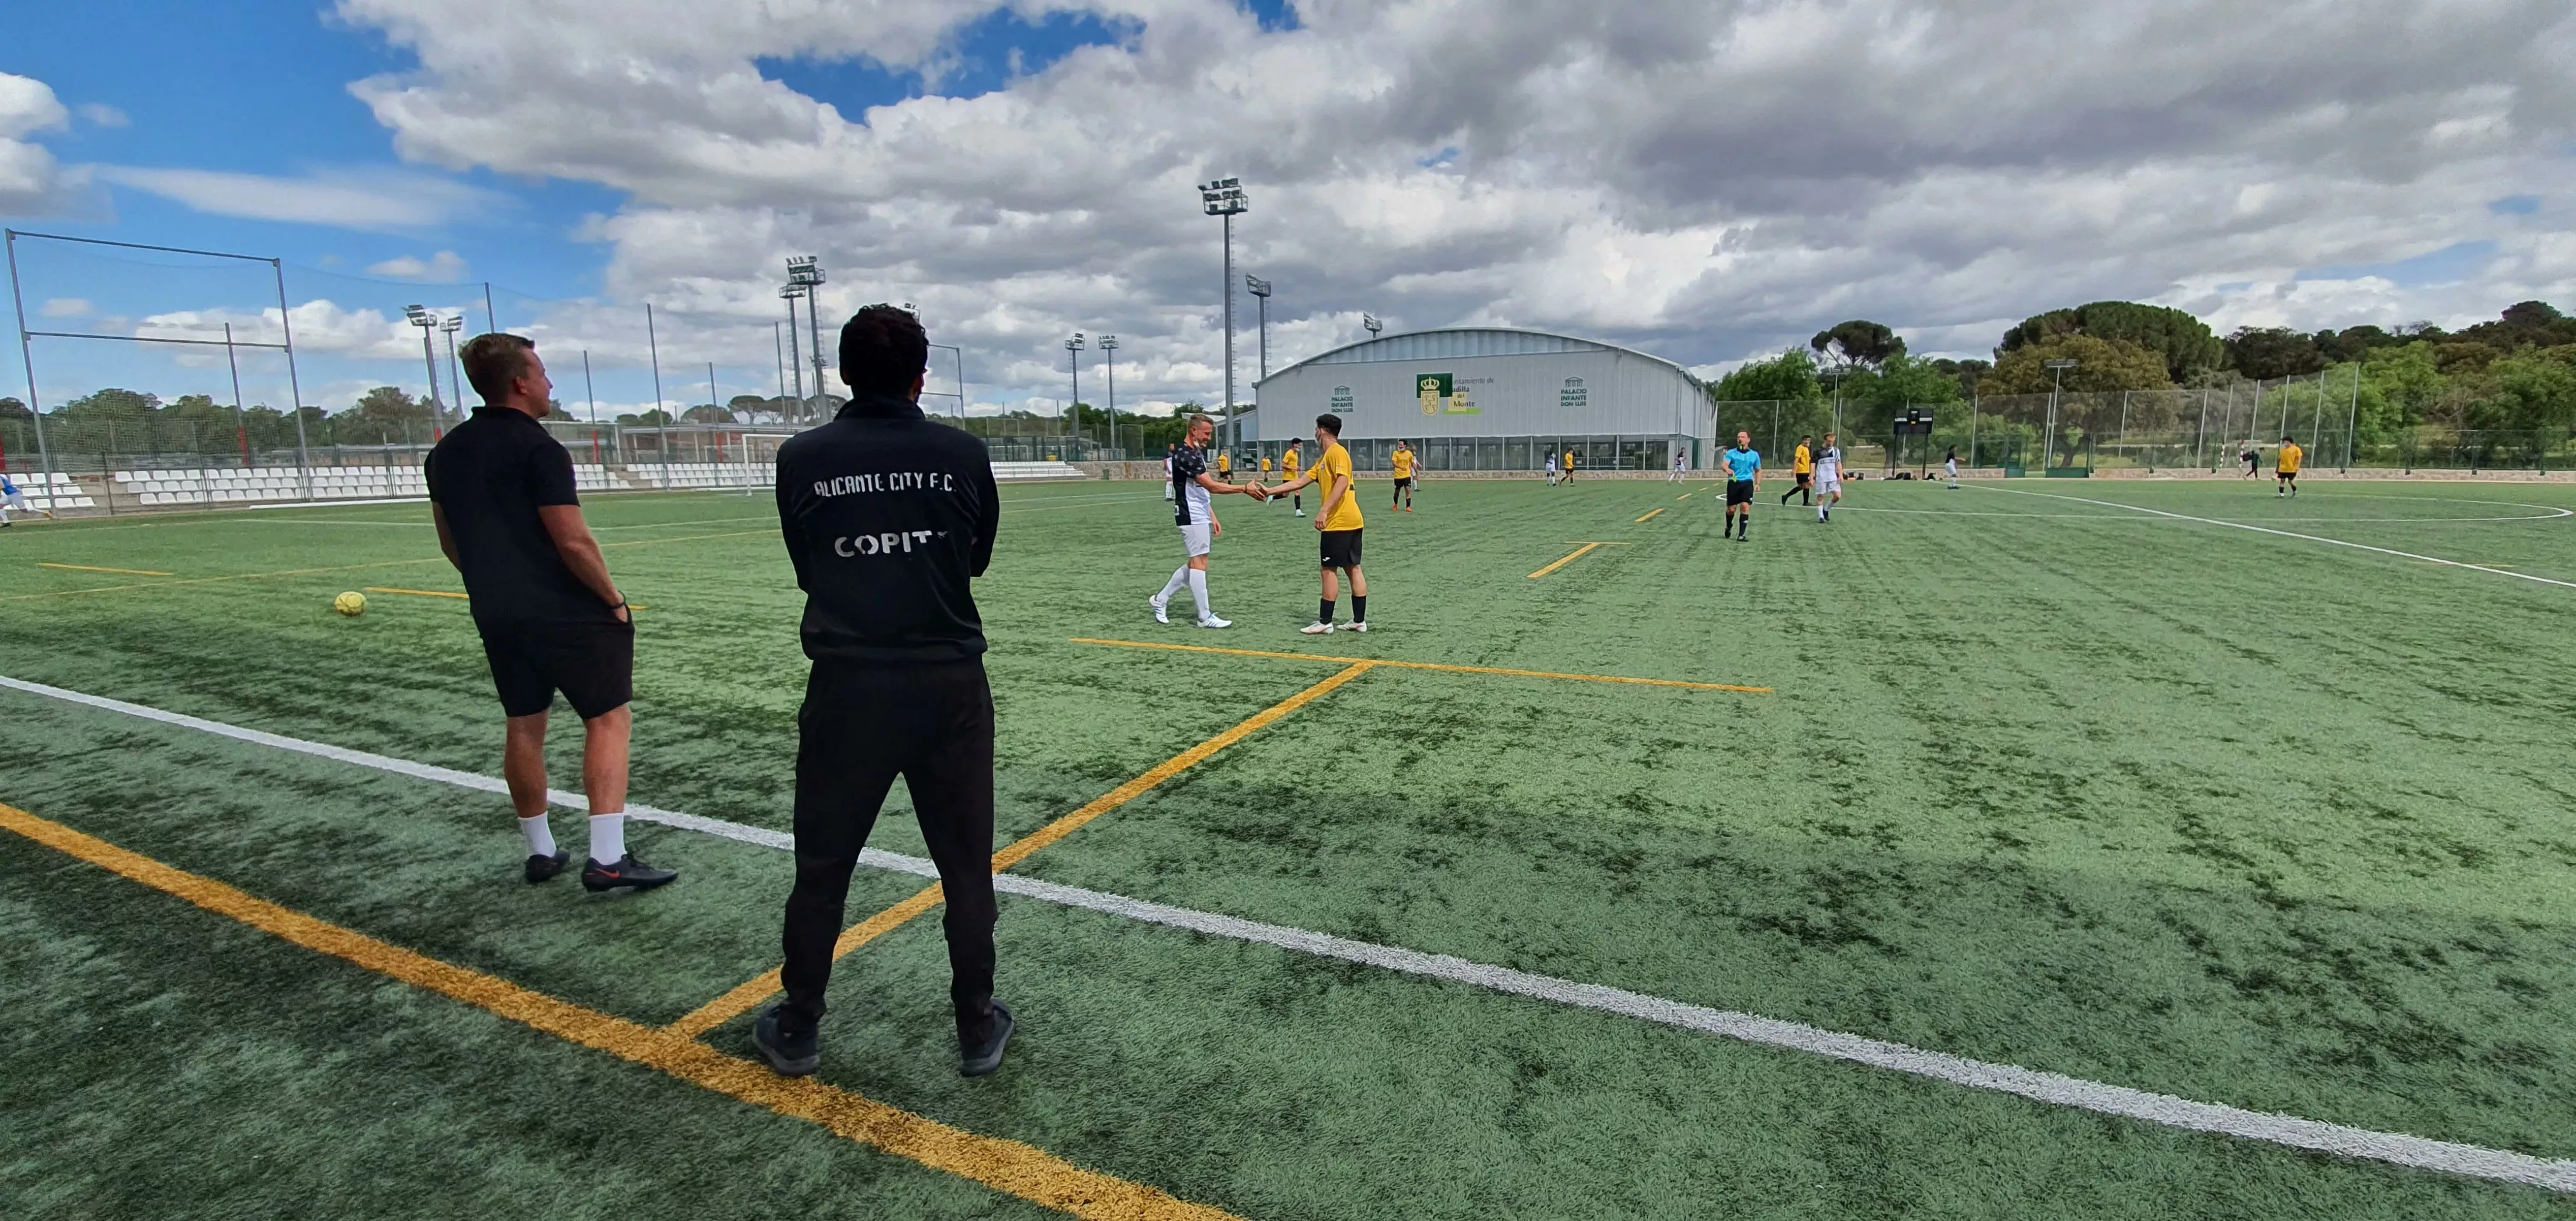 Alicante Football Academy in Spain, Europe | Football - Rated 0.9